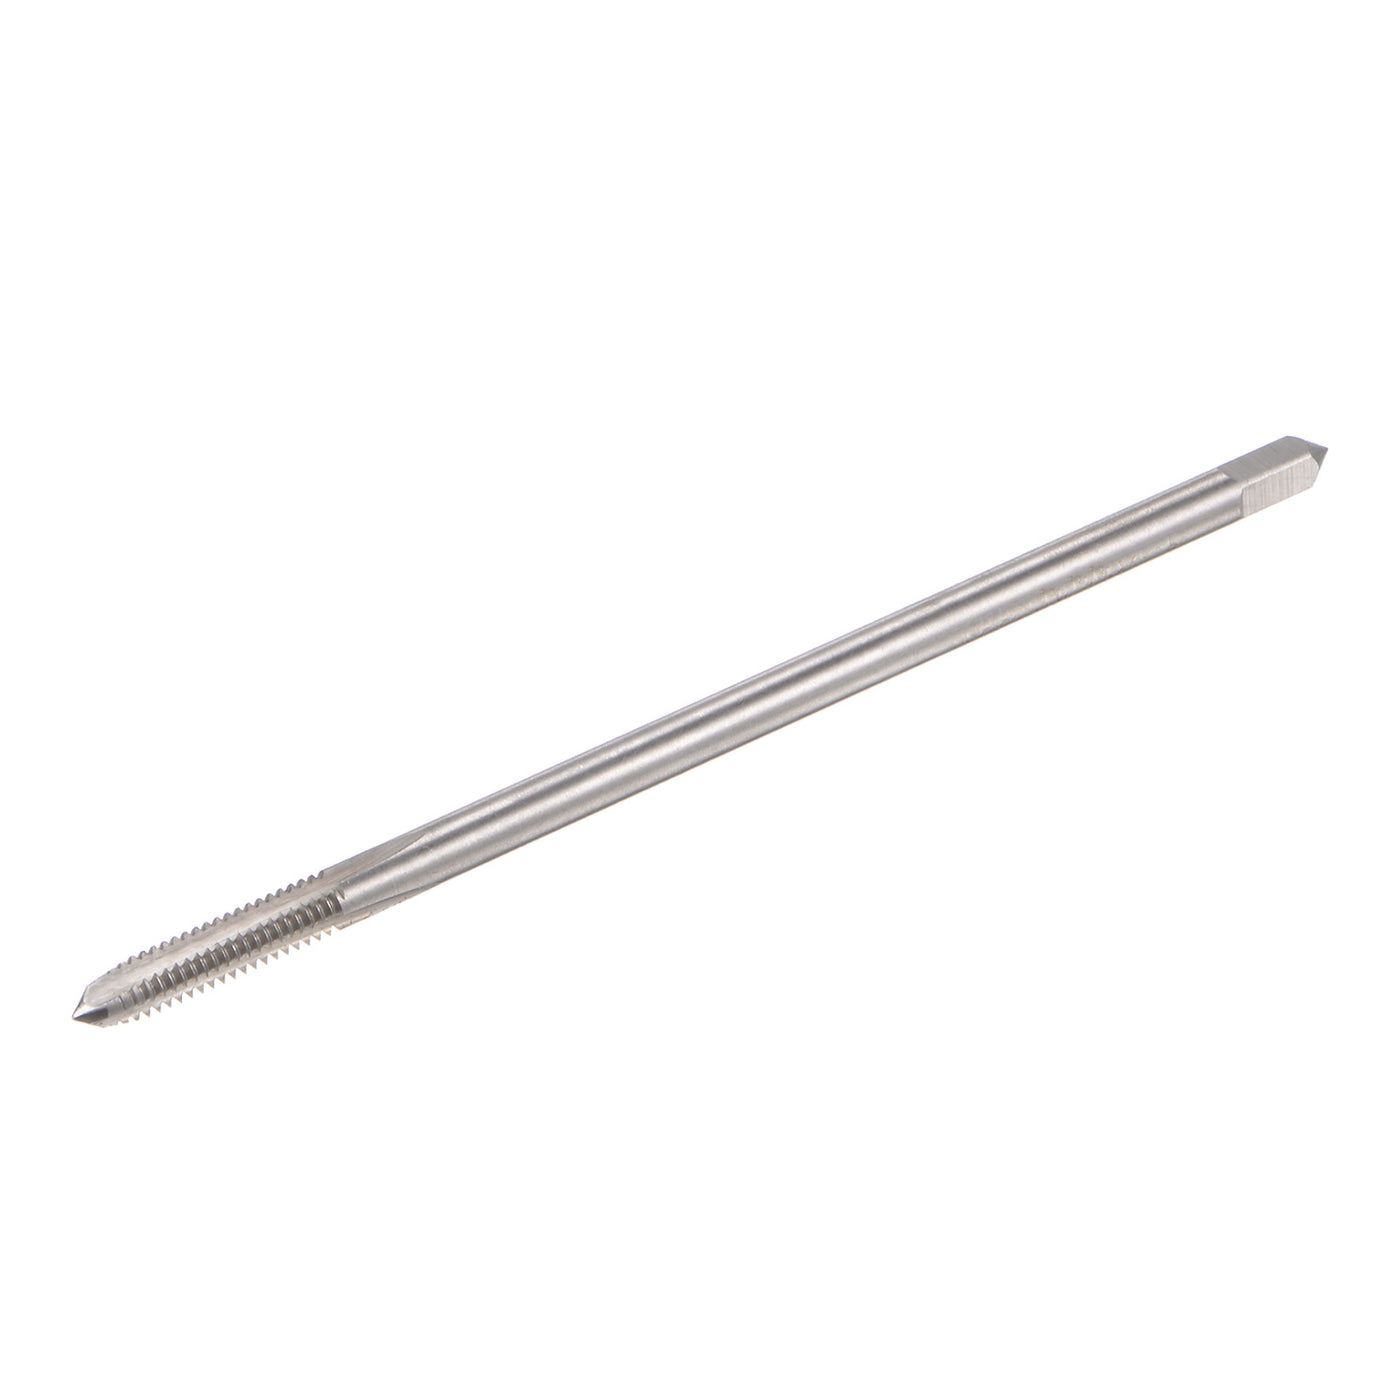 Uxcell Uxcell #6-32 UNC High Speed Steel 4" Length 3 Straight Flute Machine Screw Thread Tap